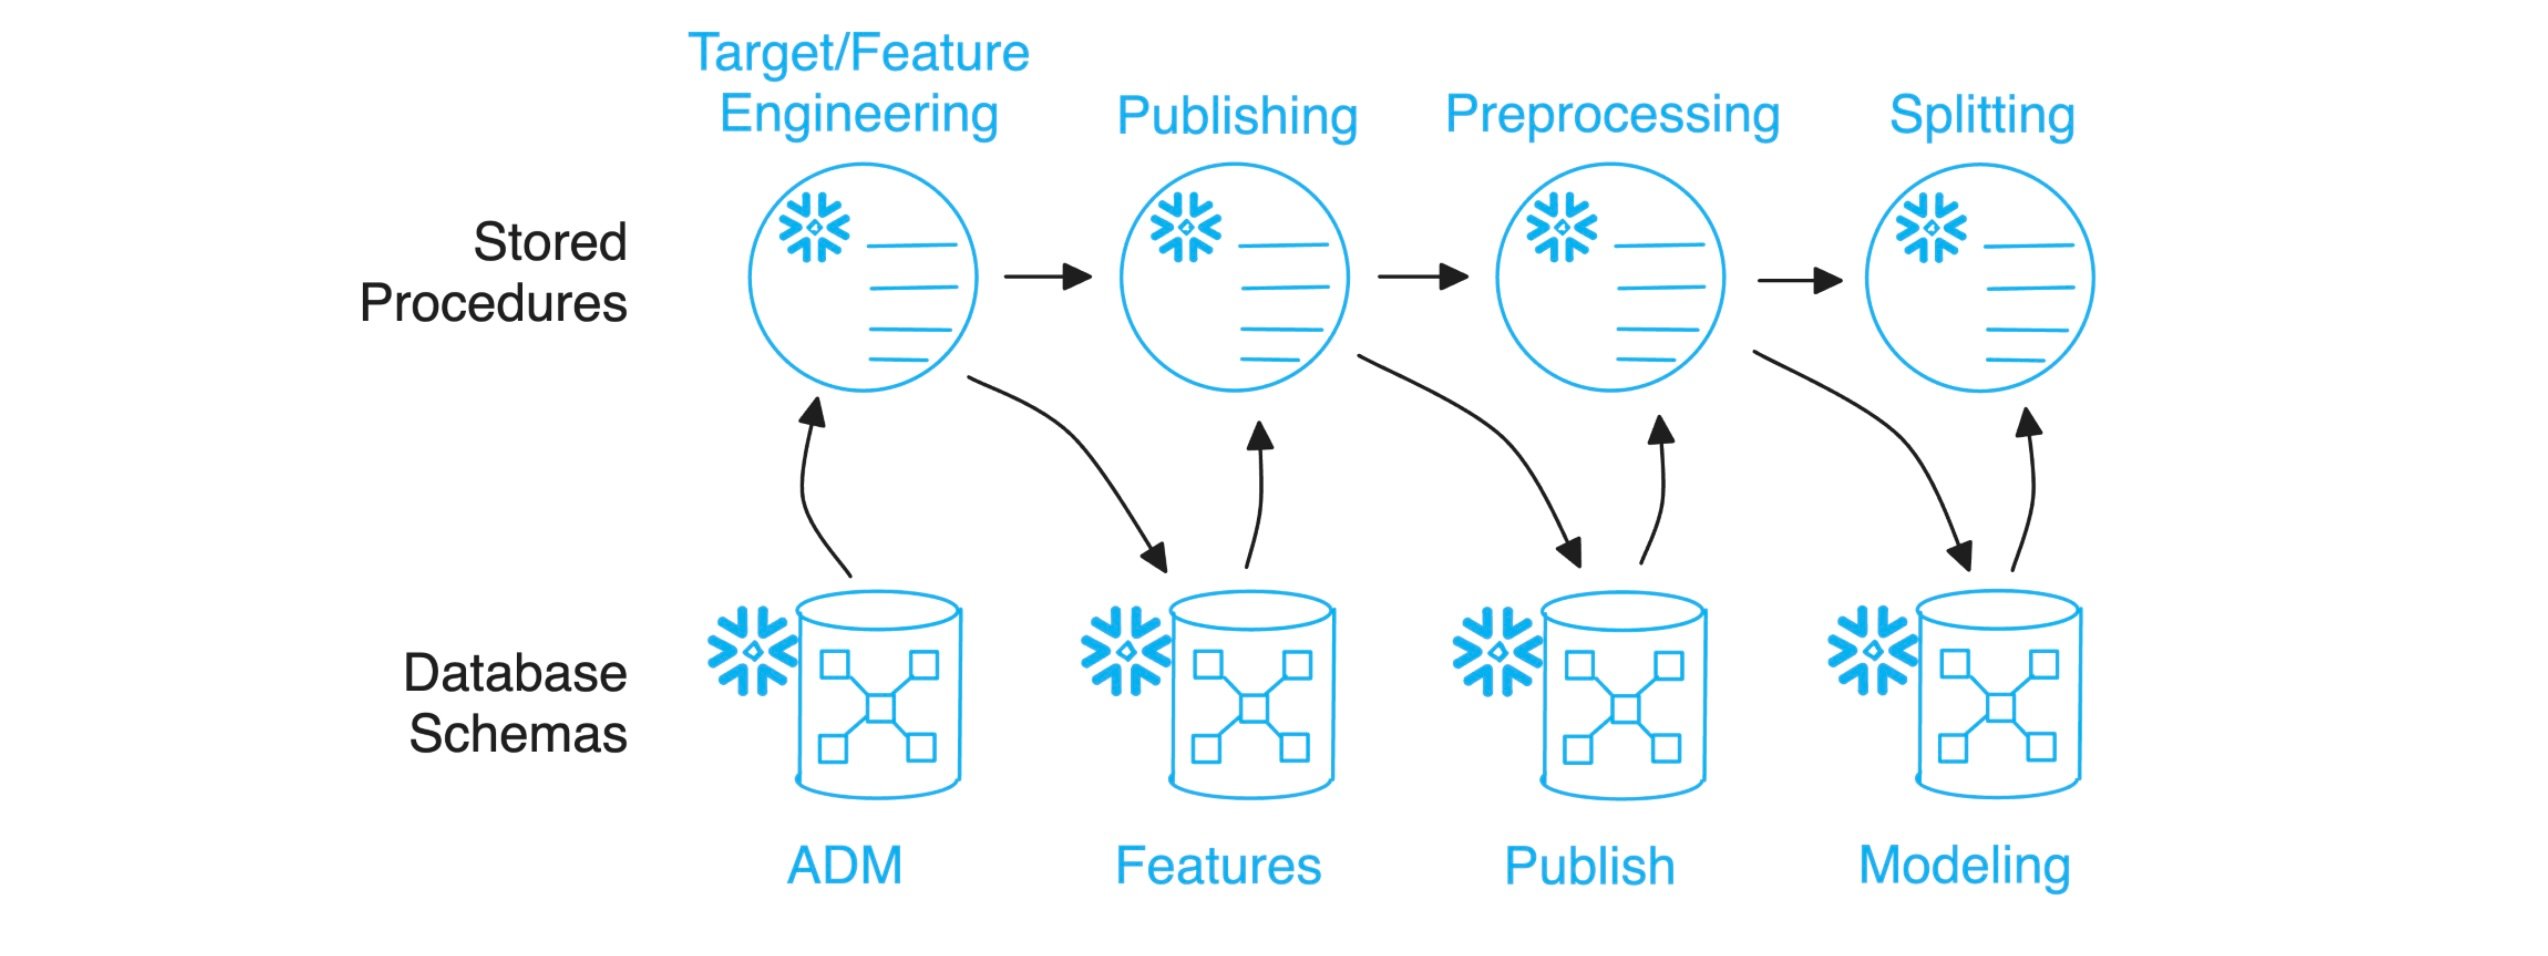 Data flow from standardized data (ADM) to traintest sets for modeling via data   publishing and preprocessing is handled by Stored Procedures (SPROCs)